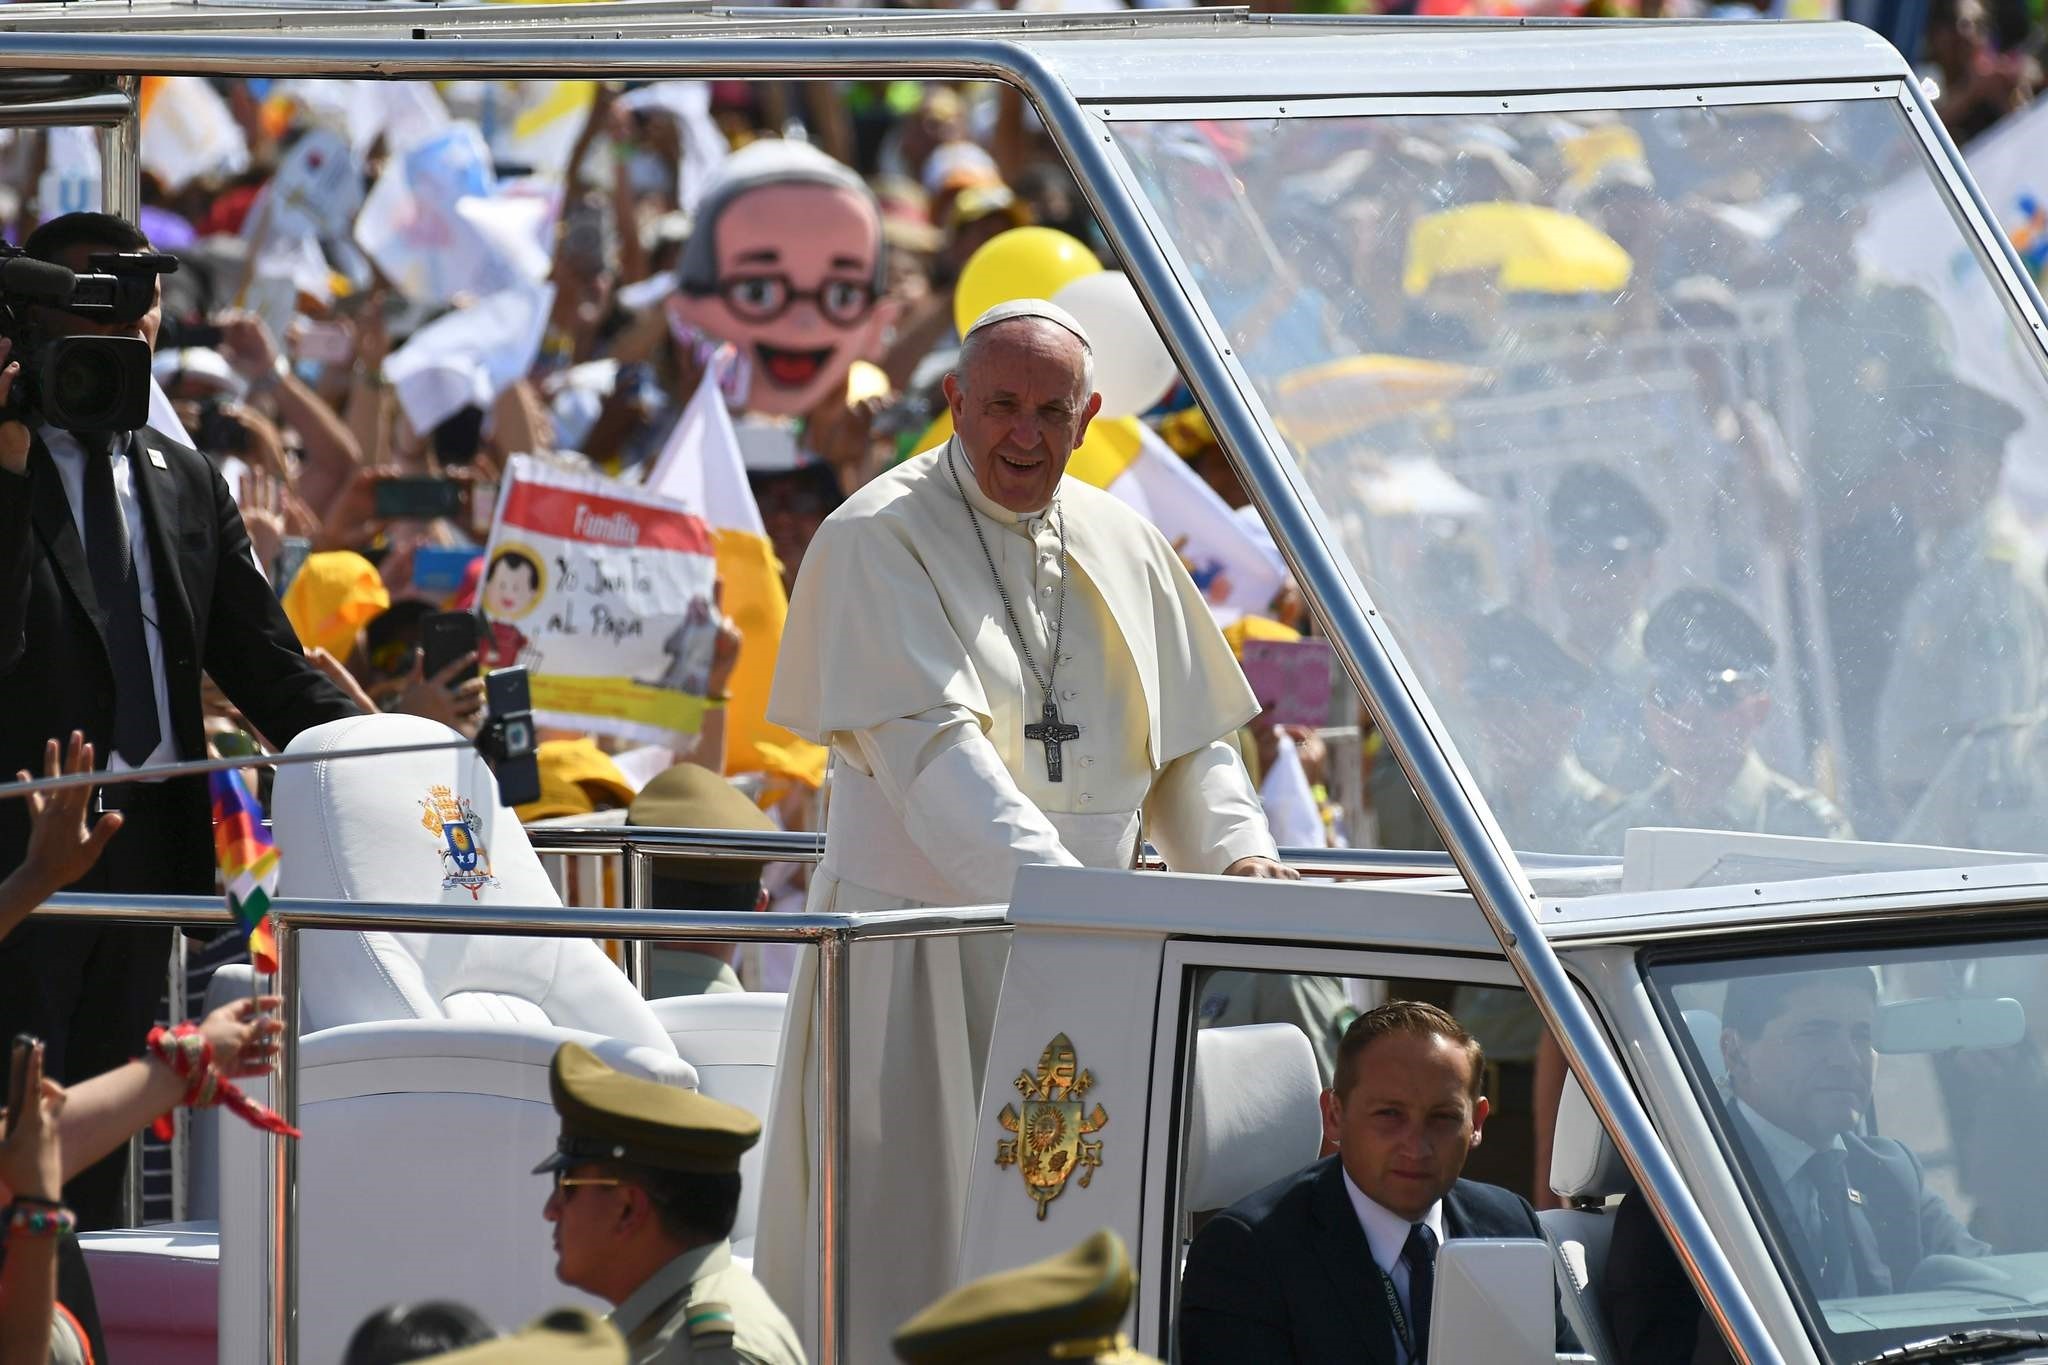 Pope Francis arrives on the popemobile at the site at Lobitos Beach, near the northern Chilean city of Iquique, where he will celebrate an open-air mass on January 18, 2018. (AFP Photo)